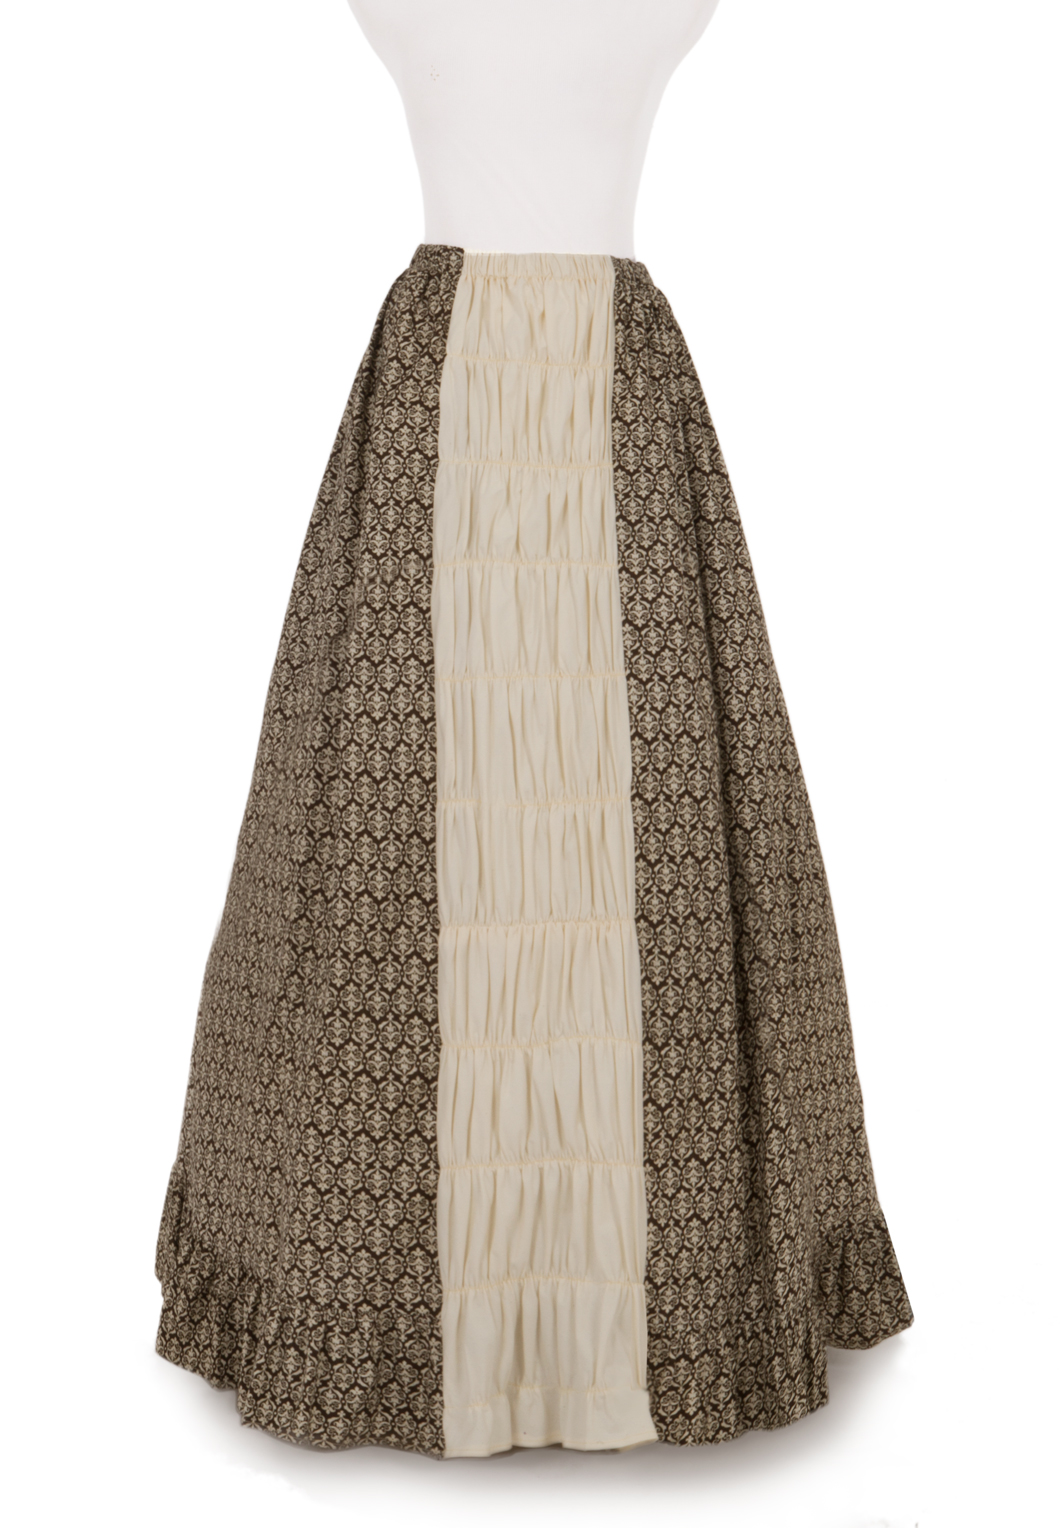 Amelia Victorian Skirt | Recollections